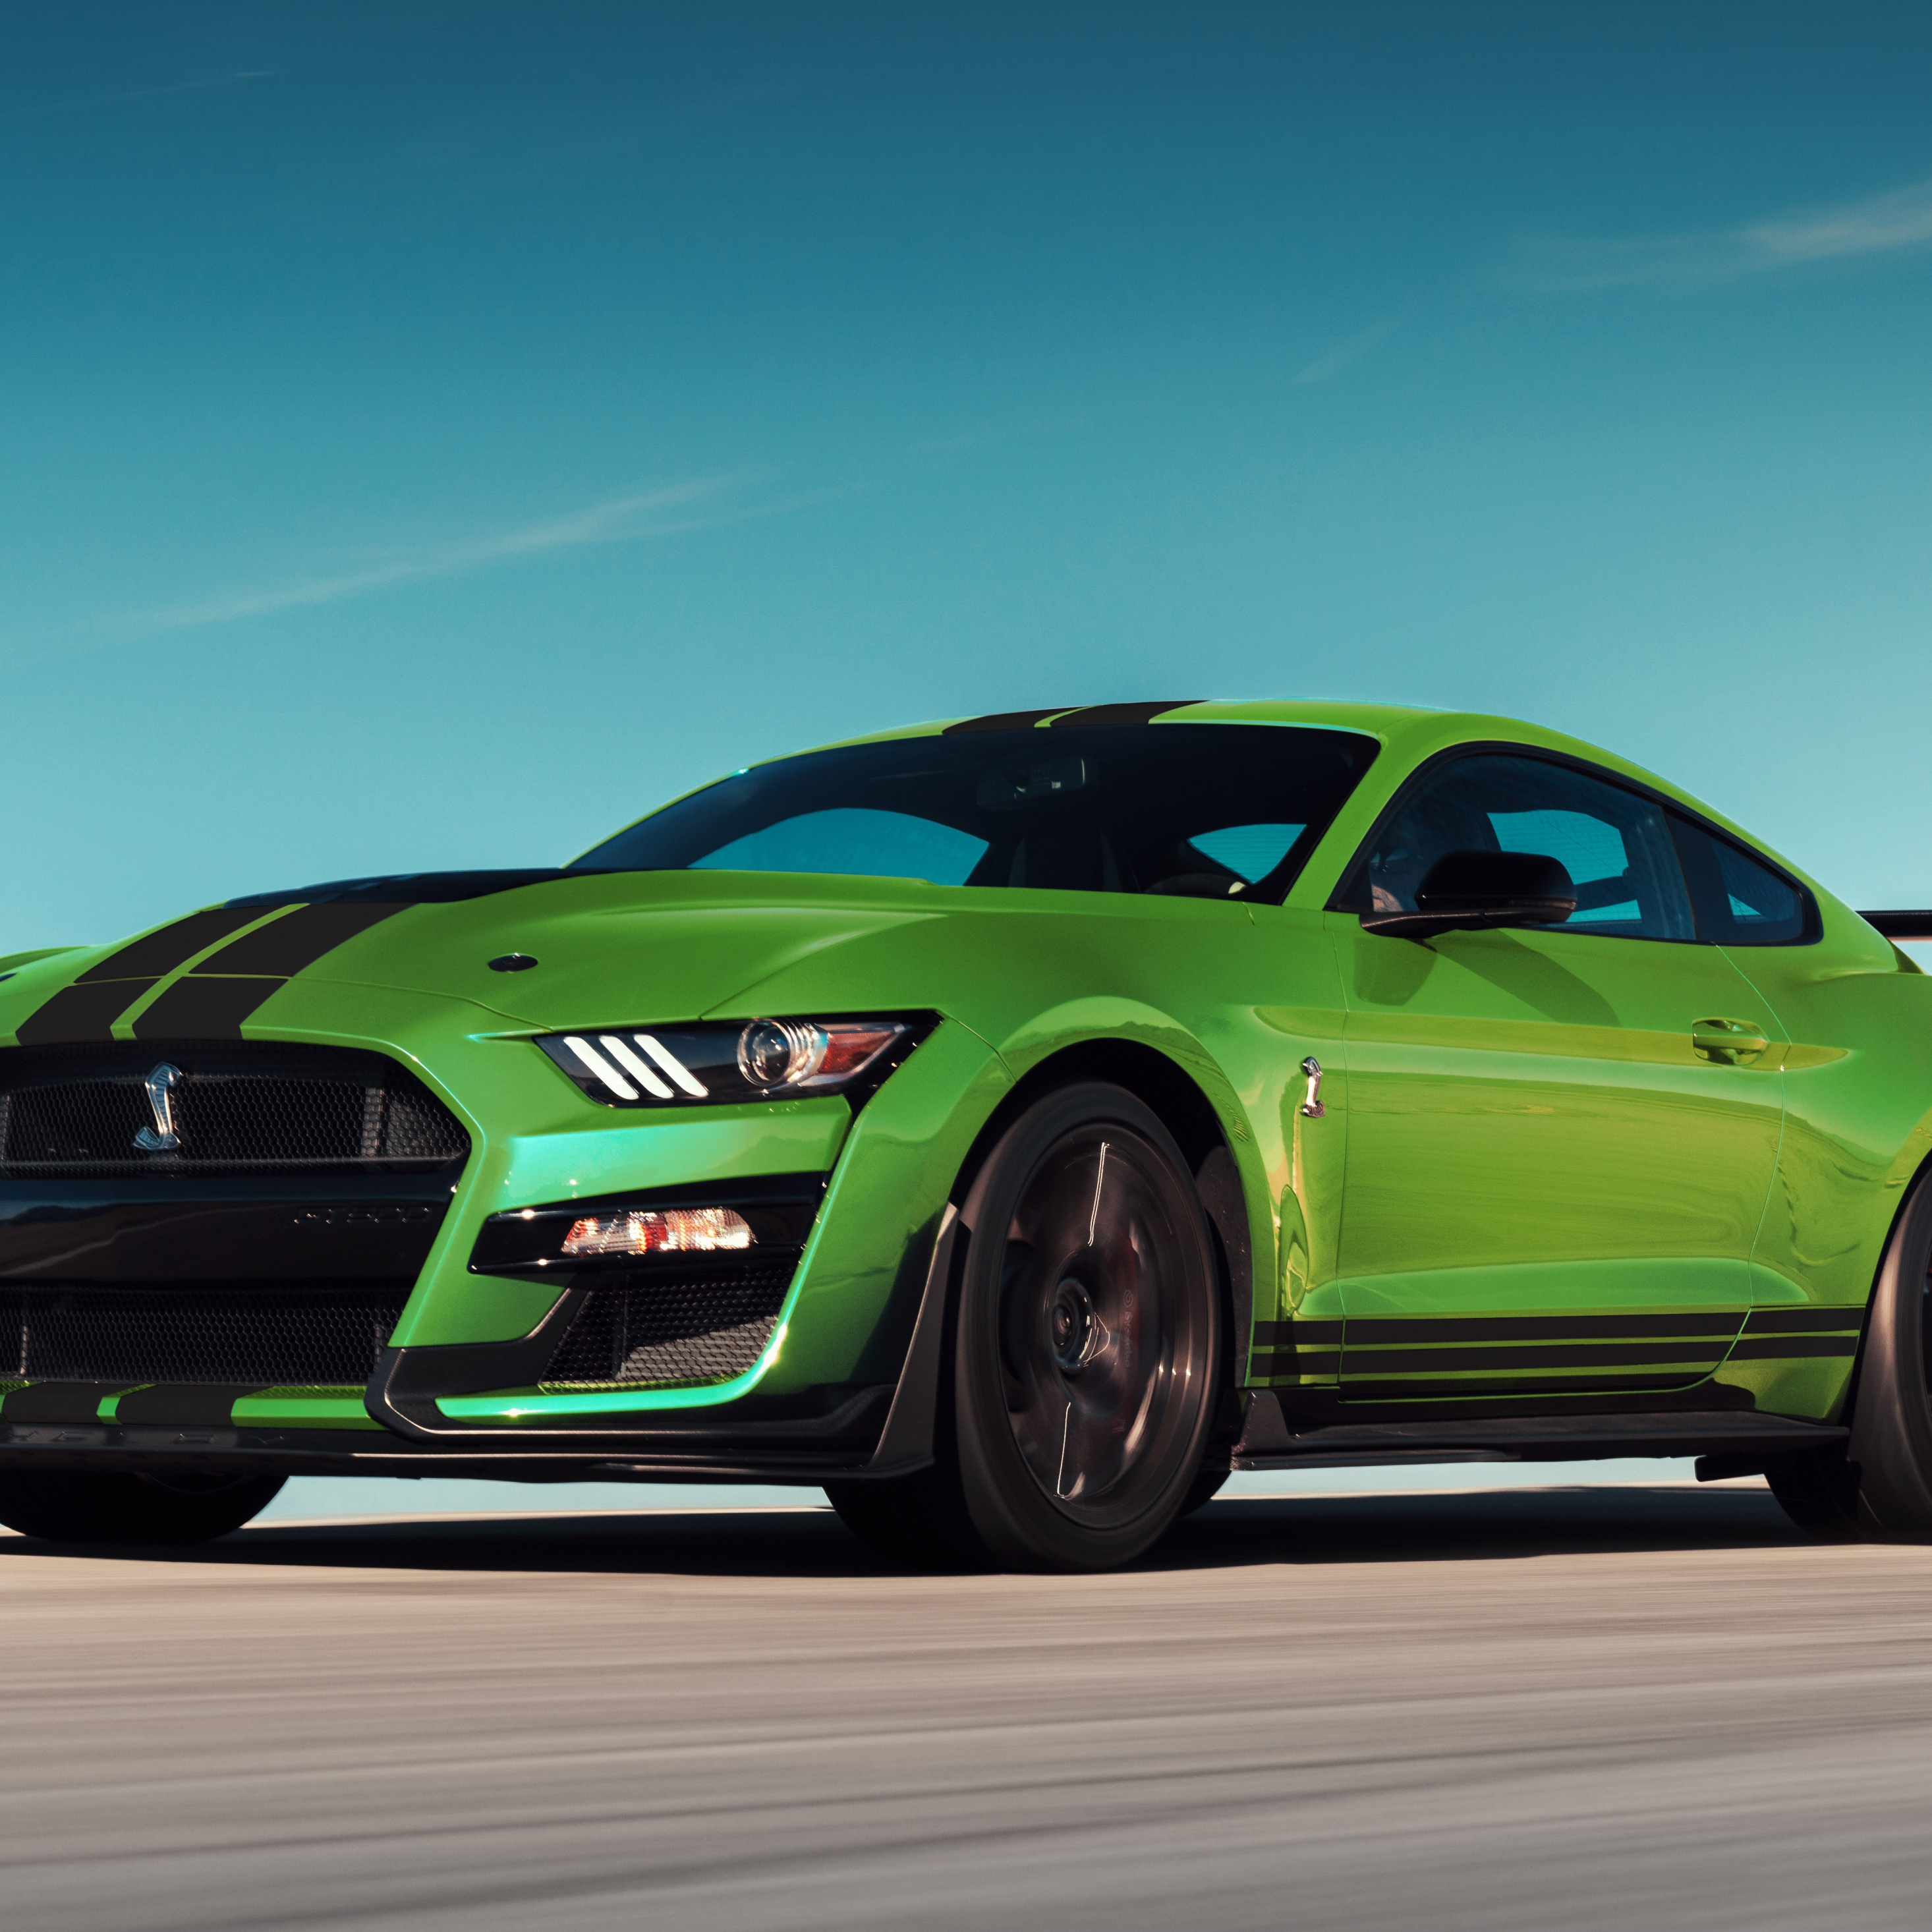 Download wallpaper 2932x2932 green, ford mustang shelby gt500, ipad pro  retina, 2932x2932 hd background, 24402